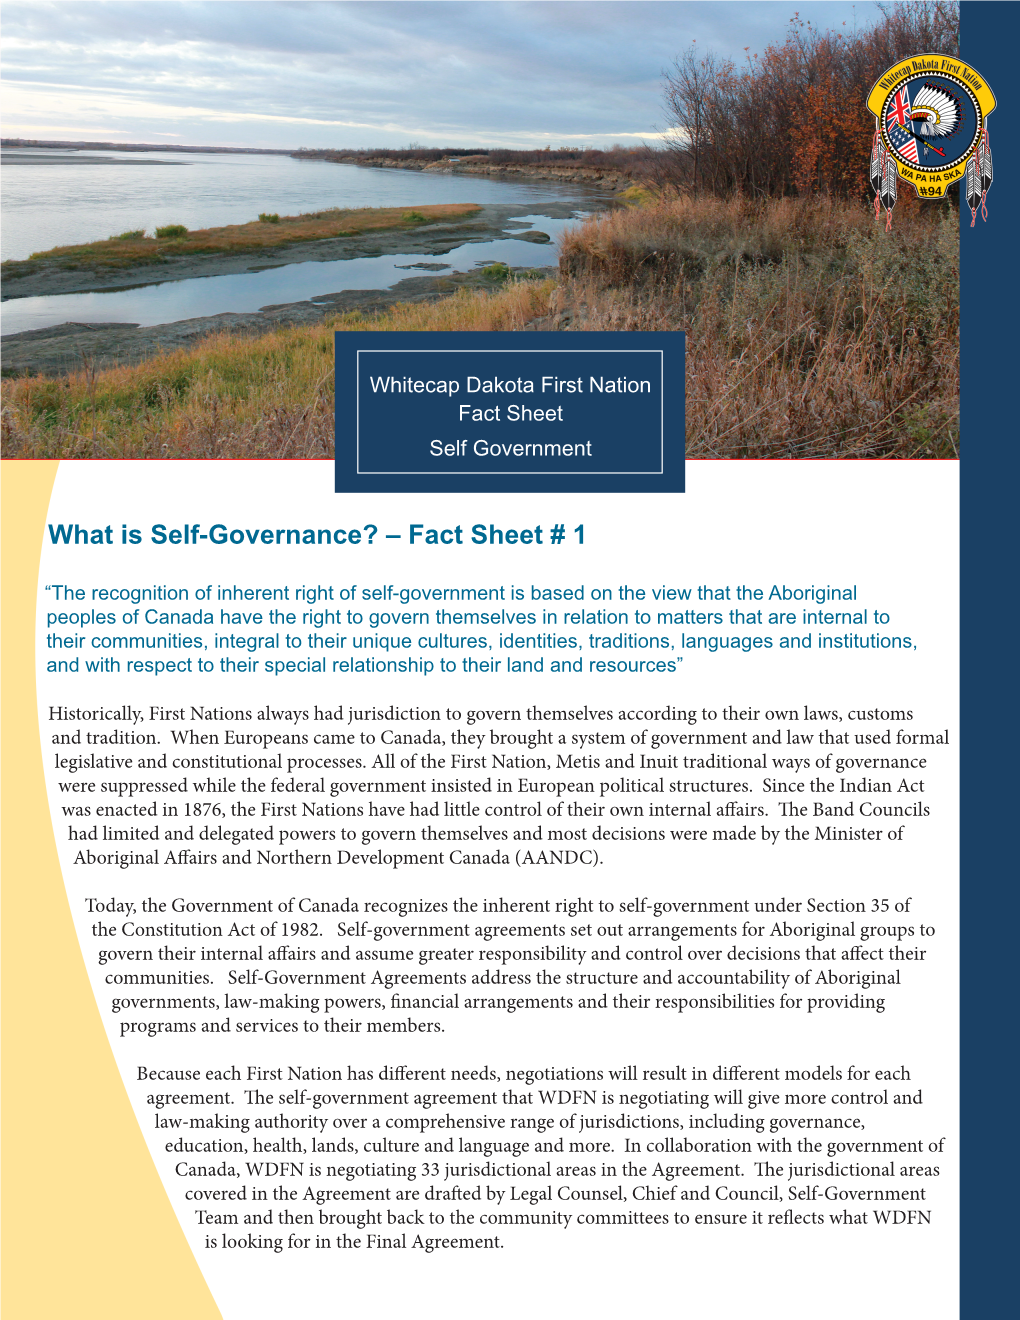 What Is Self-Governance? – Fact Sheet # 1